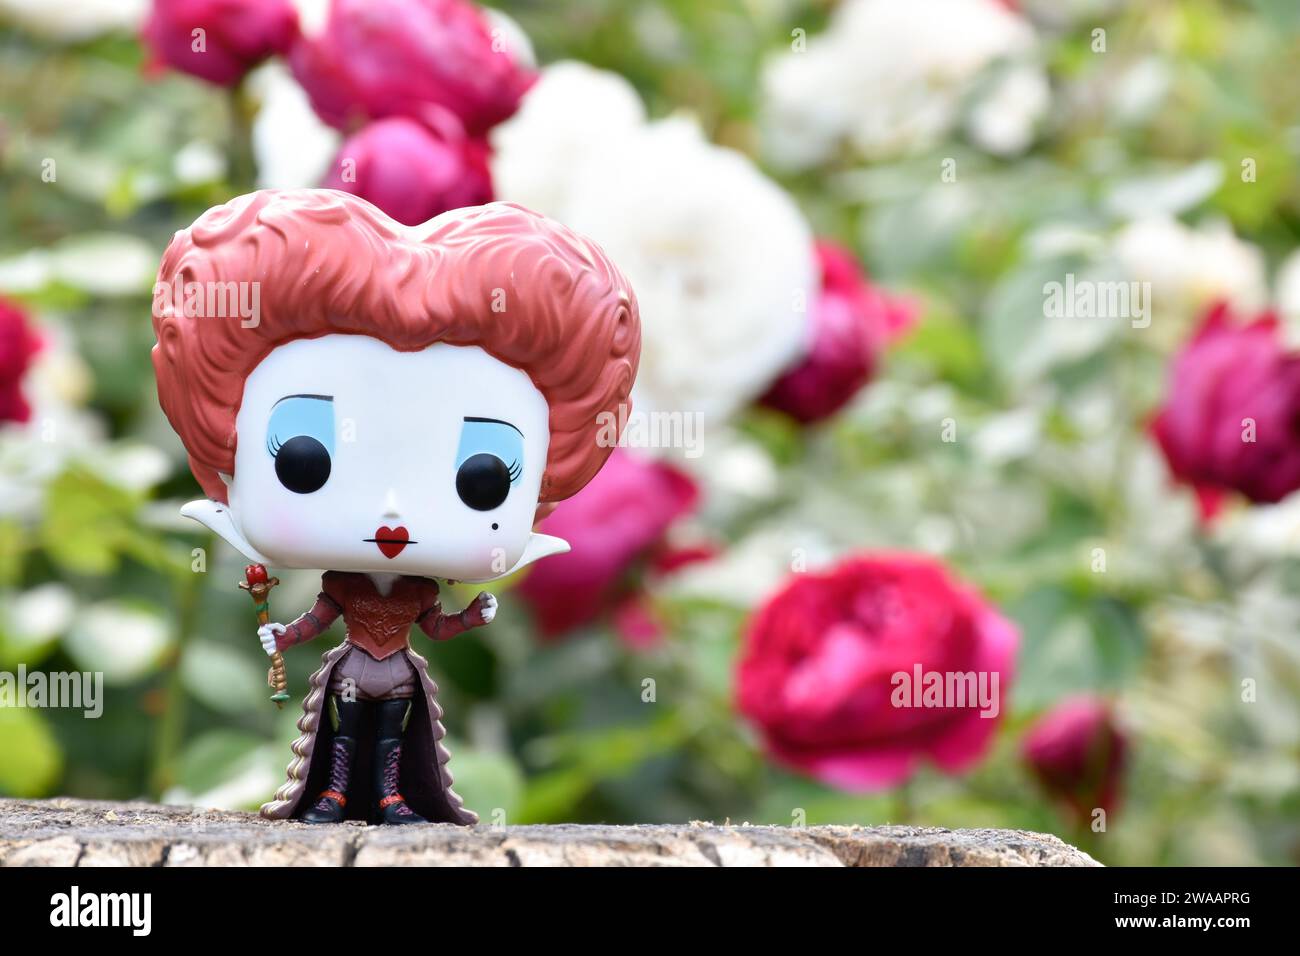 Funko Pop action figure of Red Queen from Tim Burton fantasy movie Alice in Wonderland. Red and white rose garden, green leaves, wooden stump. Stock Photo